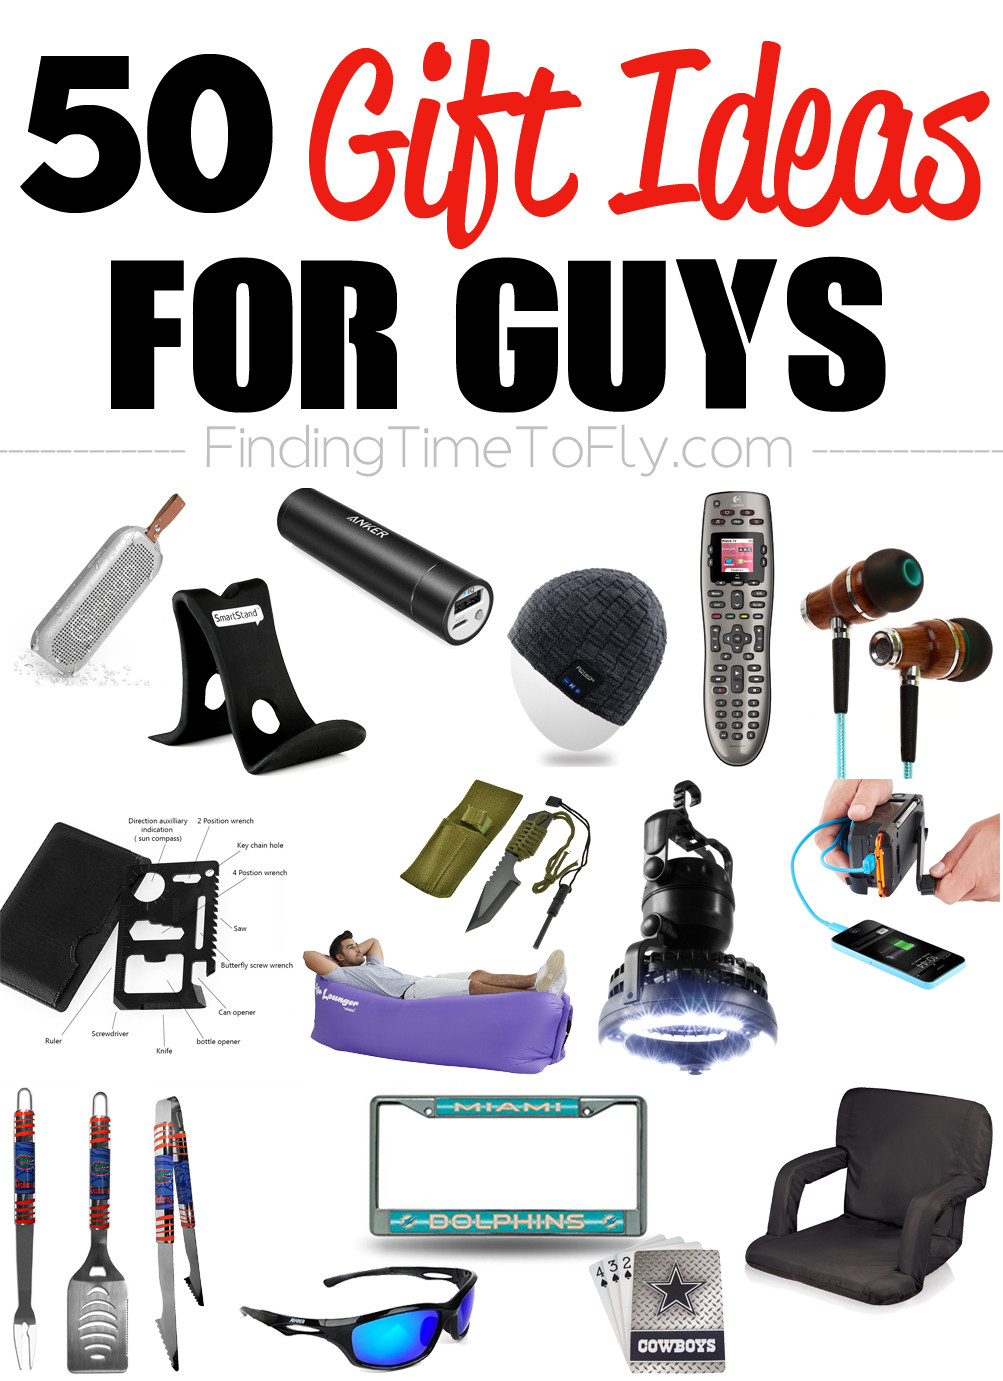 Holiday Gift Ideas For Men
 50 Gifts for Guys for Every Occasion Finding Time To Fly